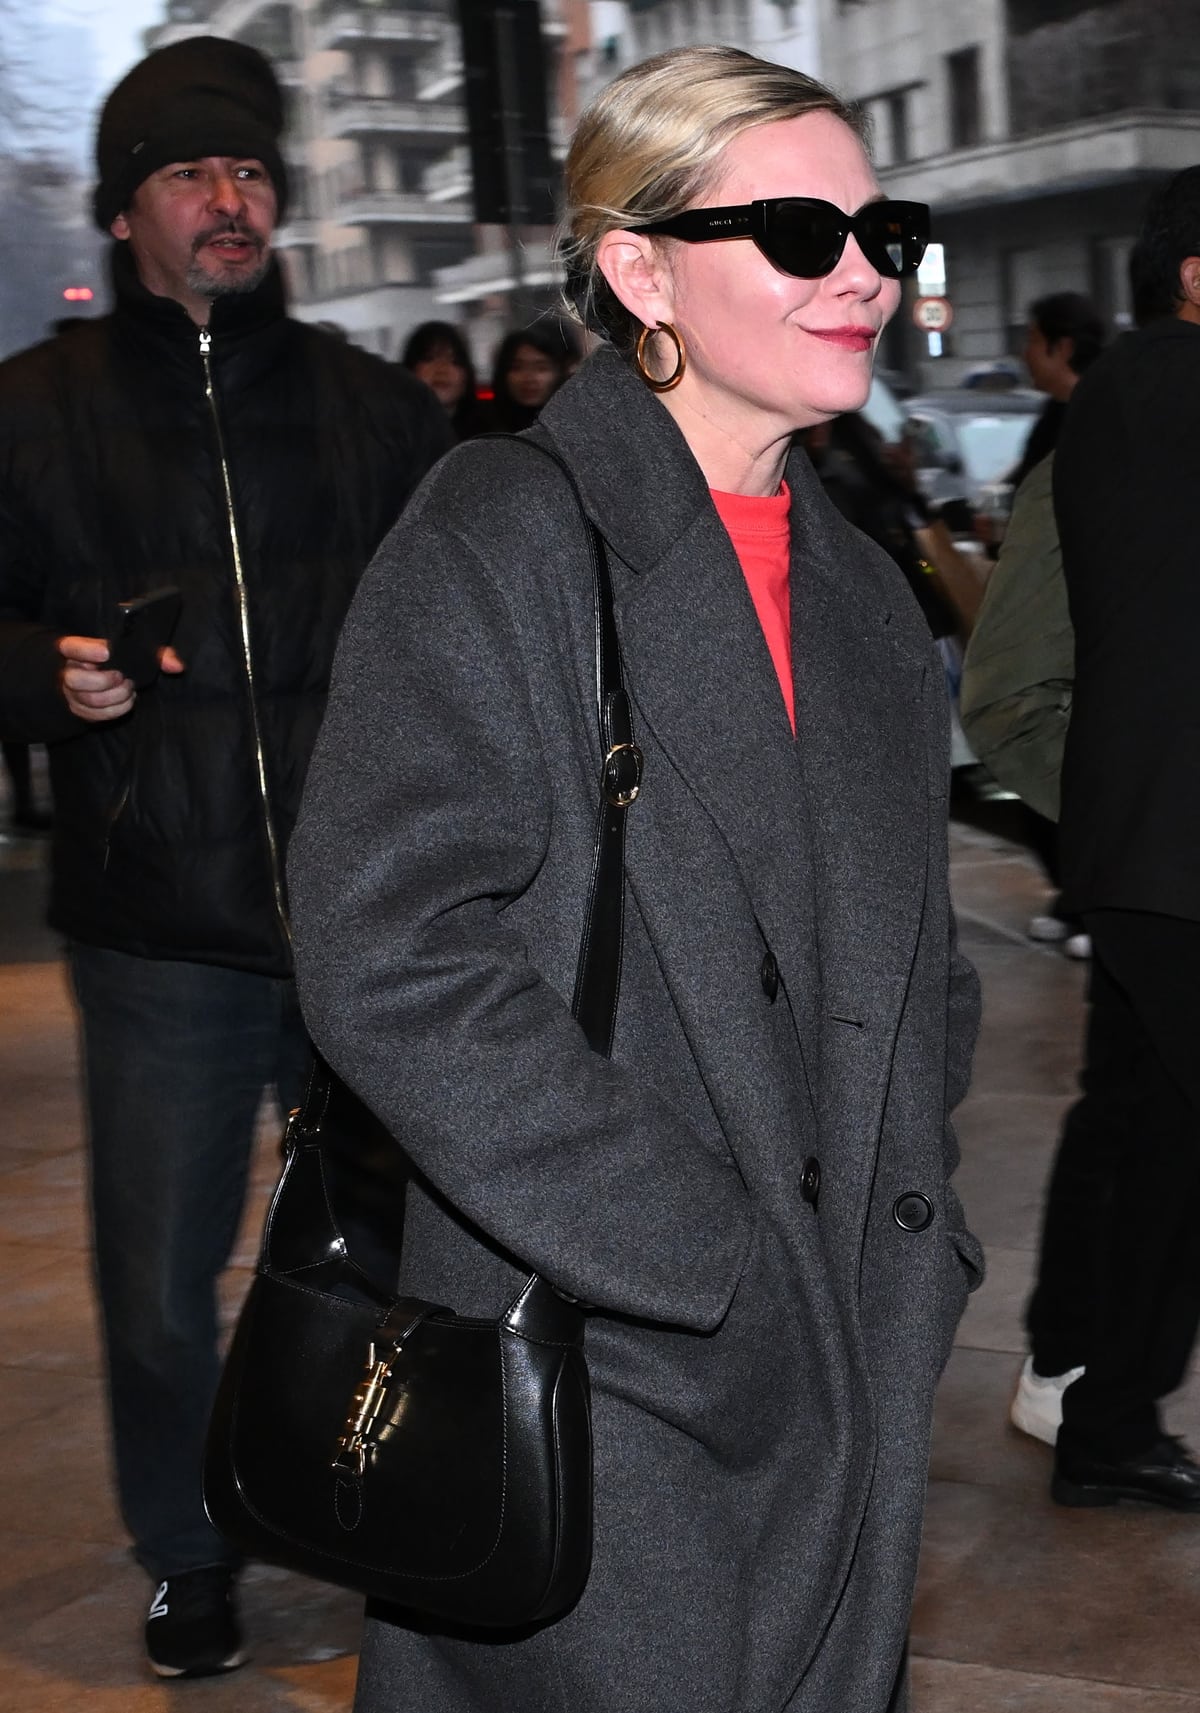 Completing Kirsten Dunst's outfit, a Gucci Jackie 1961 small shoulder bag, Gucci rectangular-frame sunglasses, and elegant gold hoop earrings, paired with her hair styled in an elegant updo, epitomize daytime chic